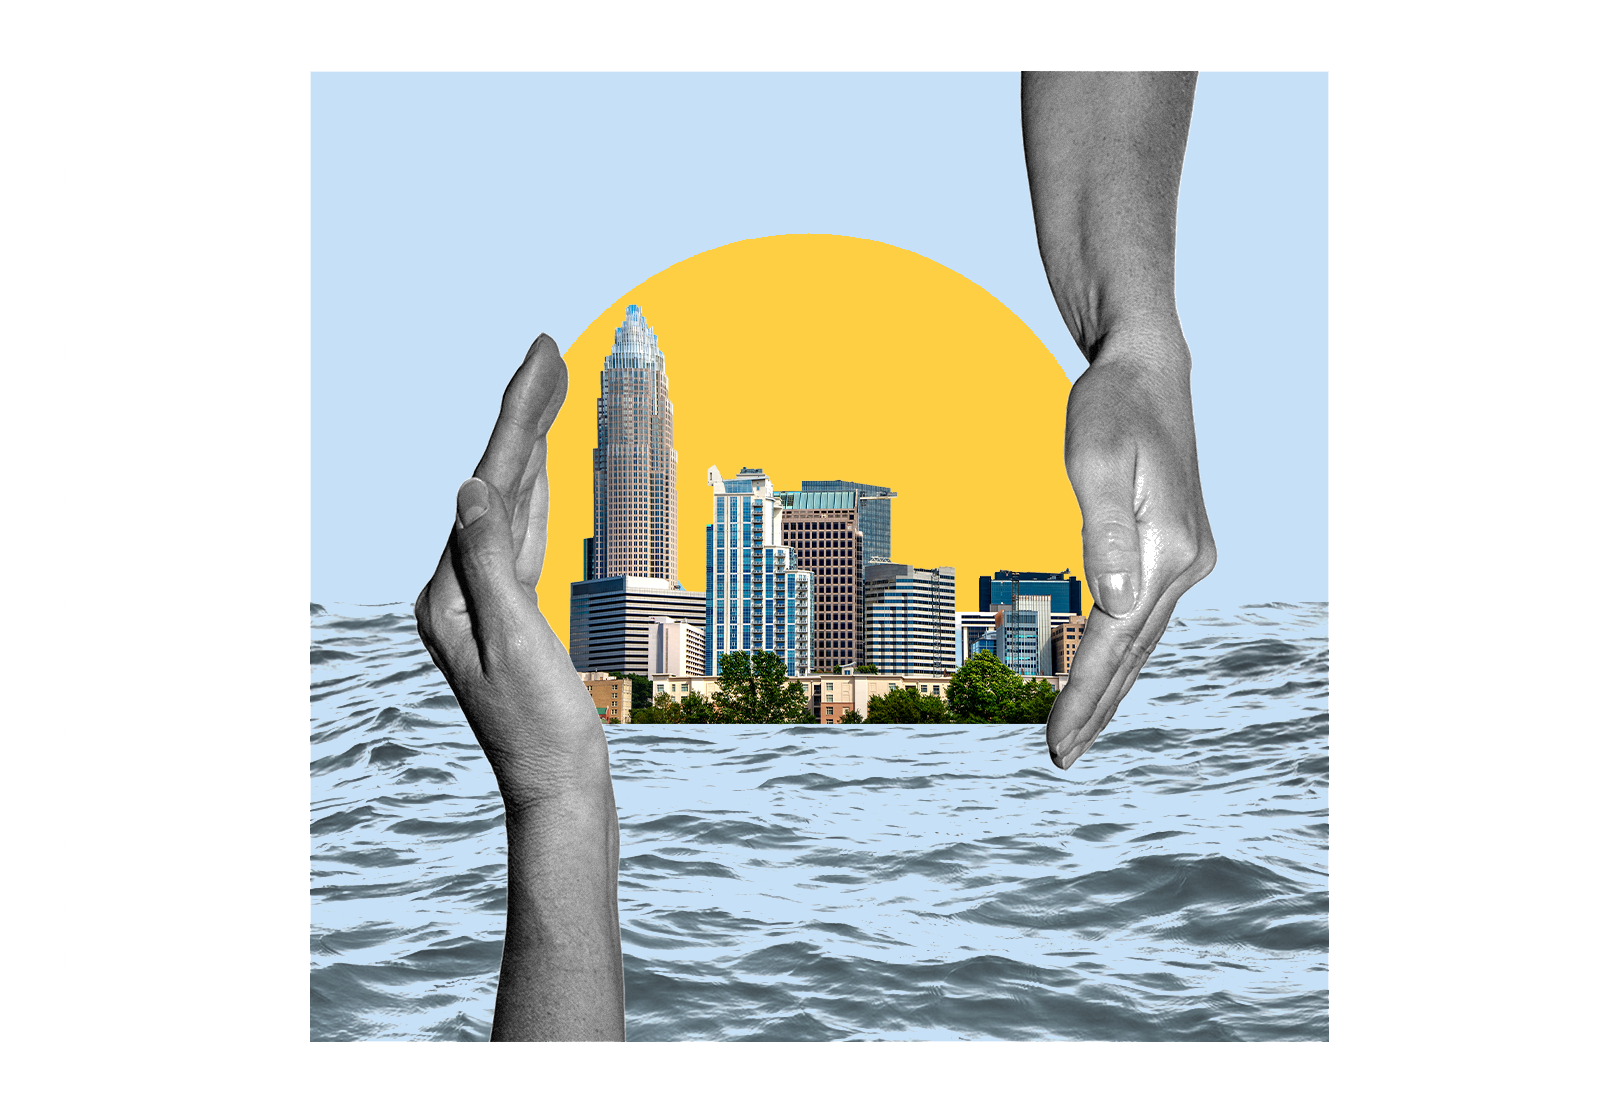 Hands protecting a city surrounded by water